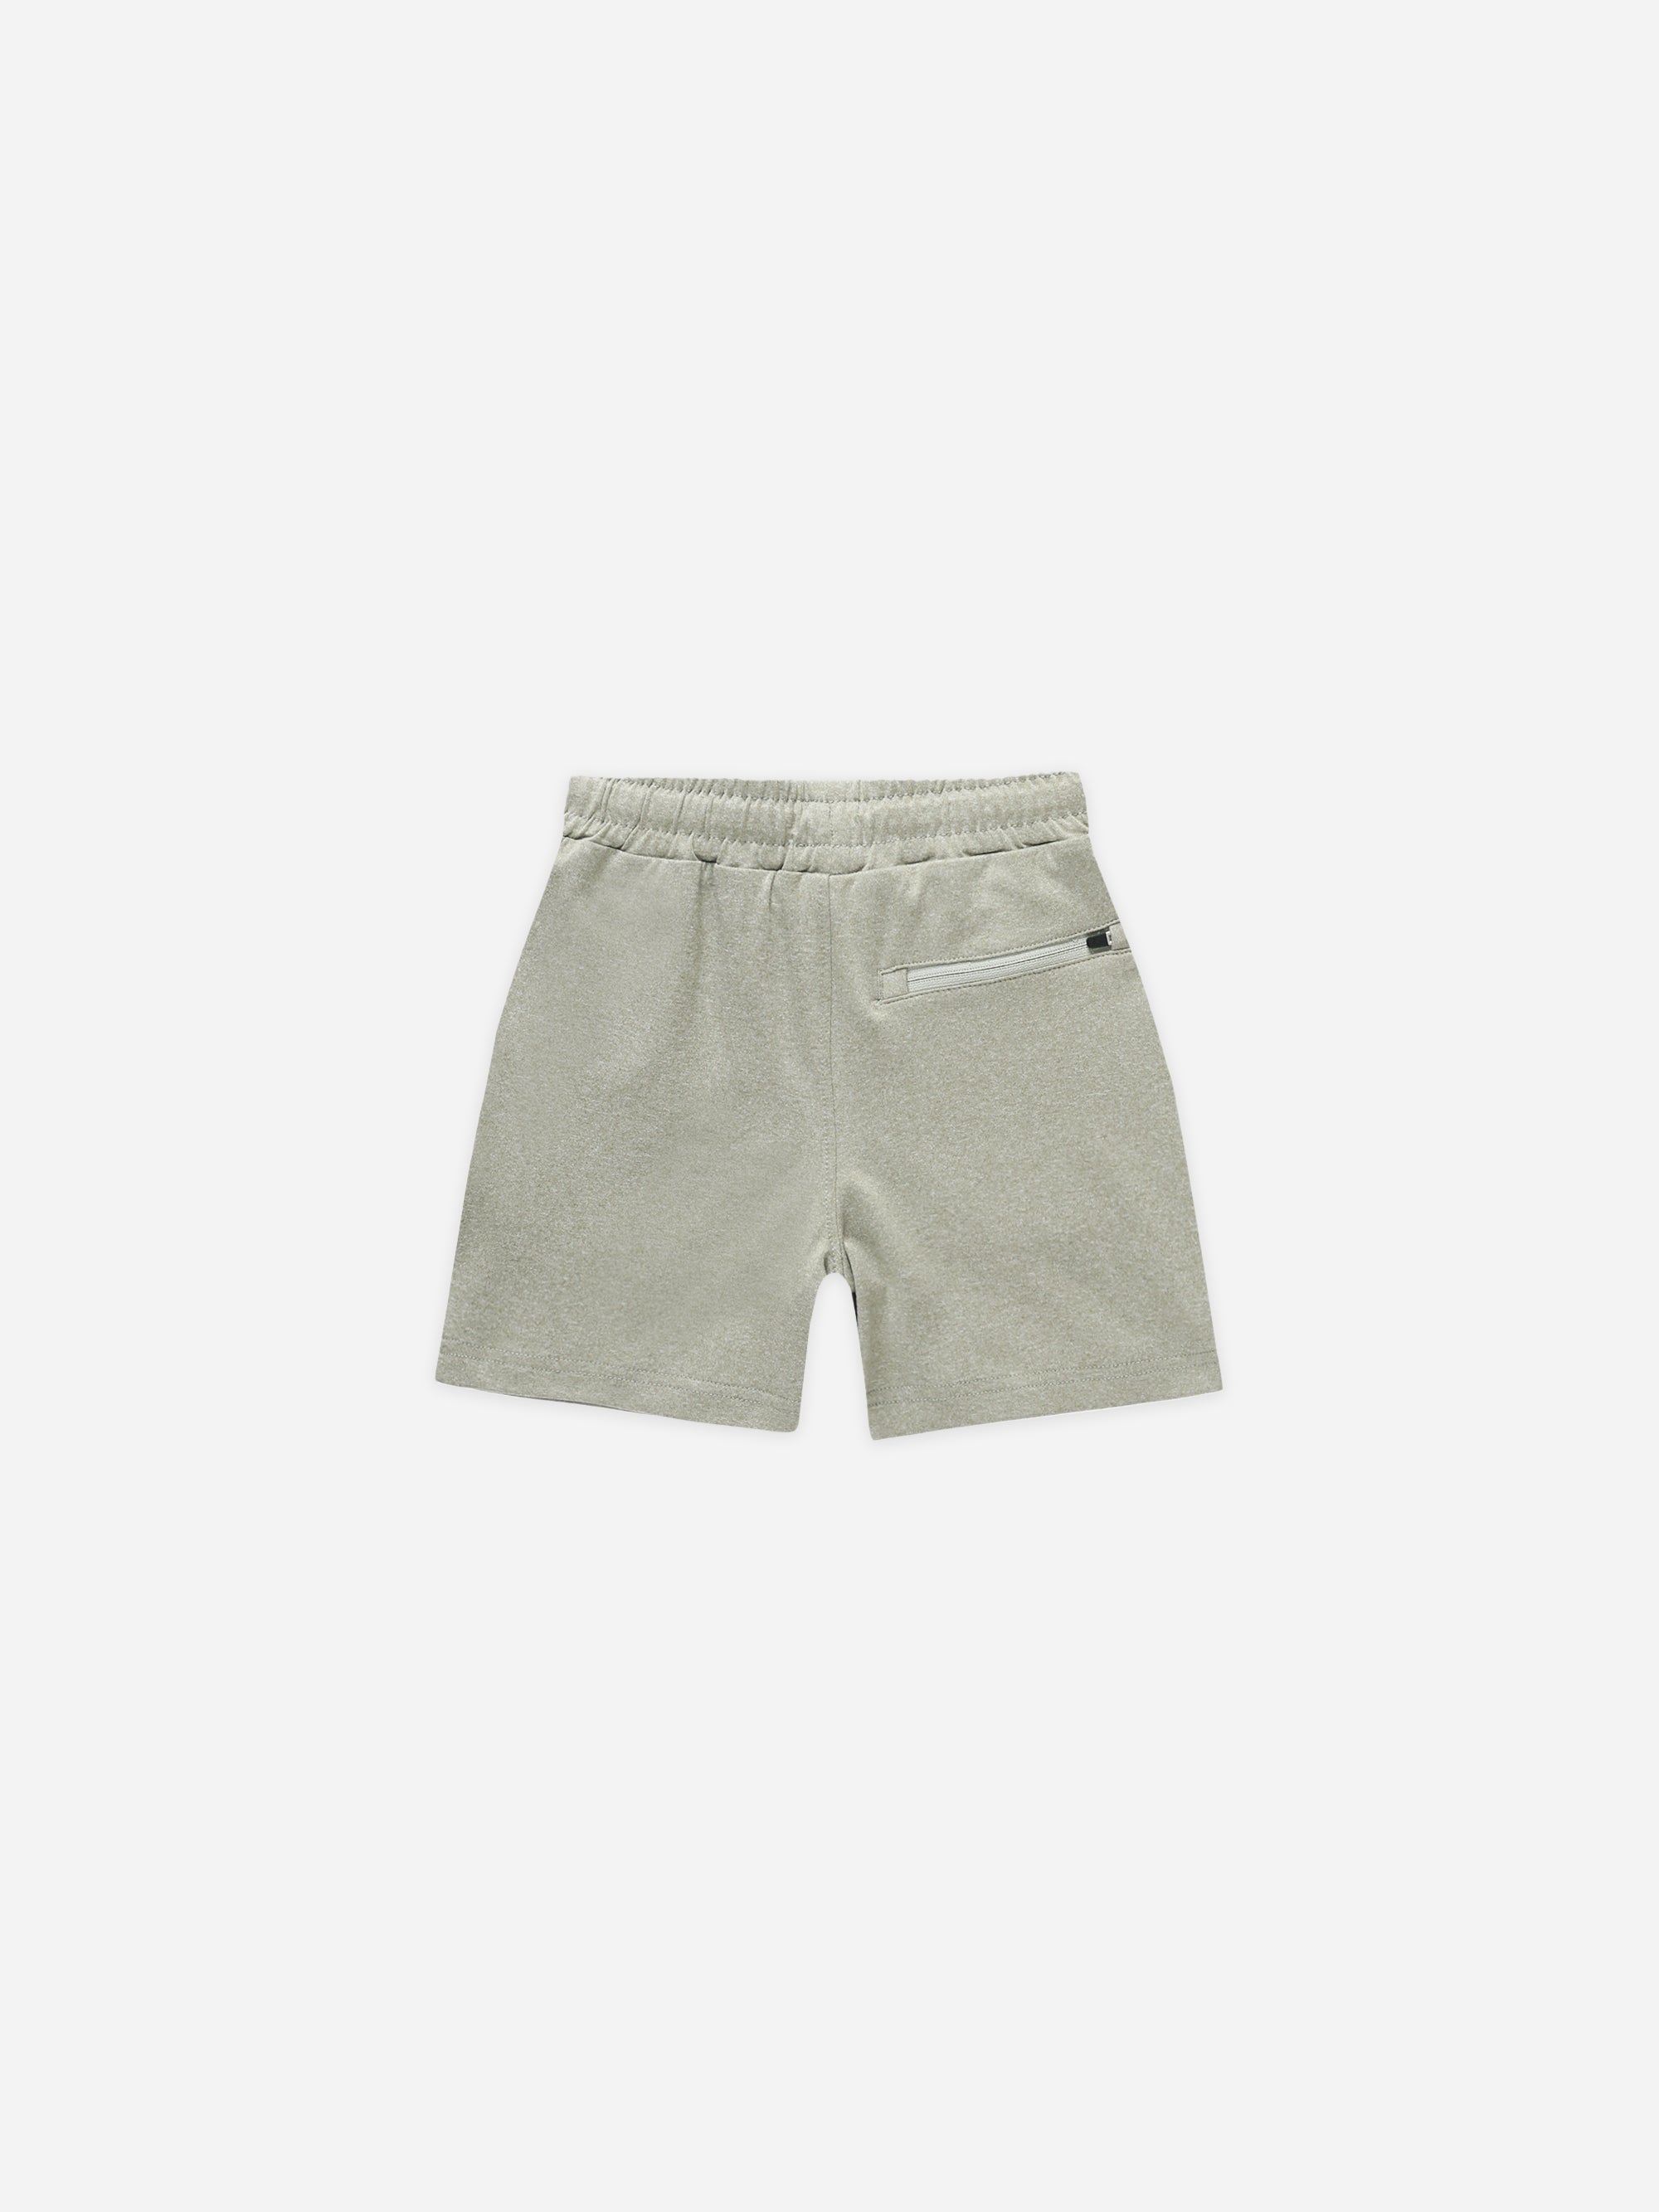 Oceanside Tech Short || Heathered Sage - Rylee + Cru | Kids Clothes | Trendy Baby Clothes | Modern Infant Outfits |